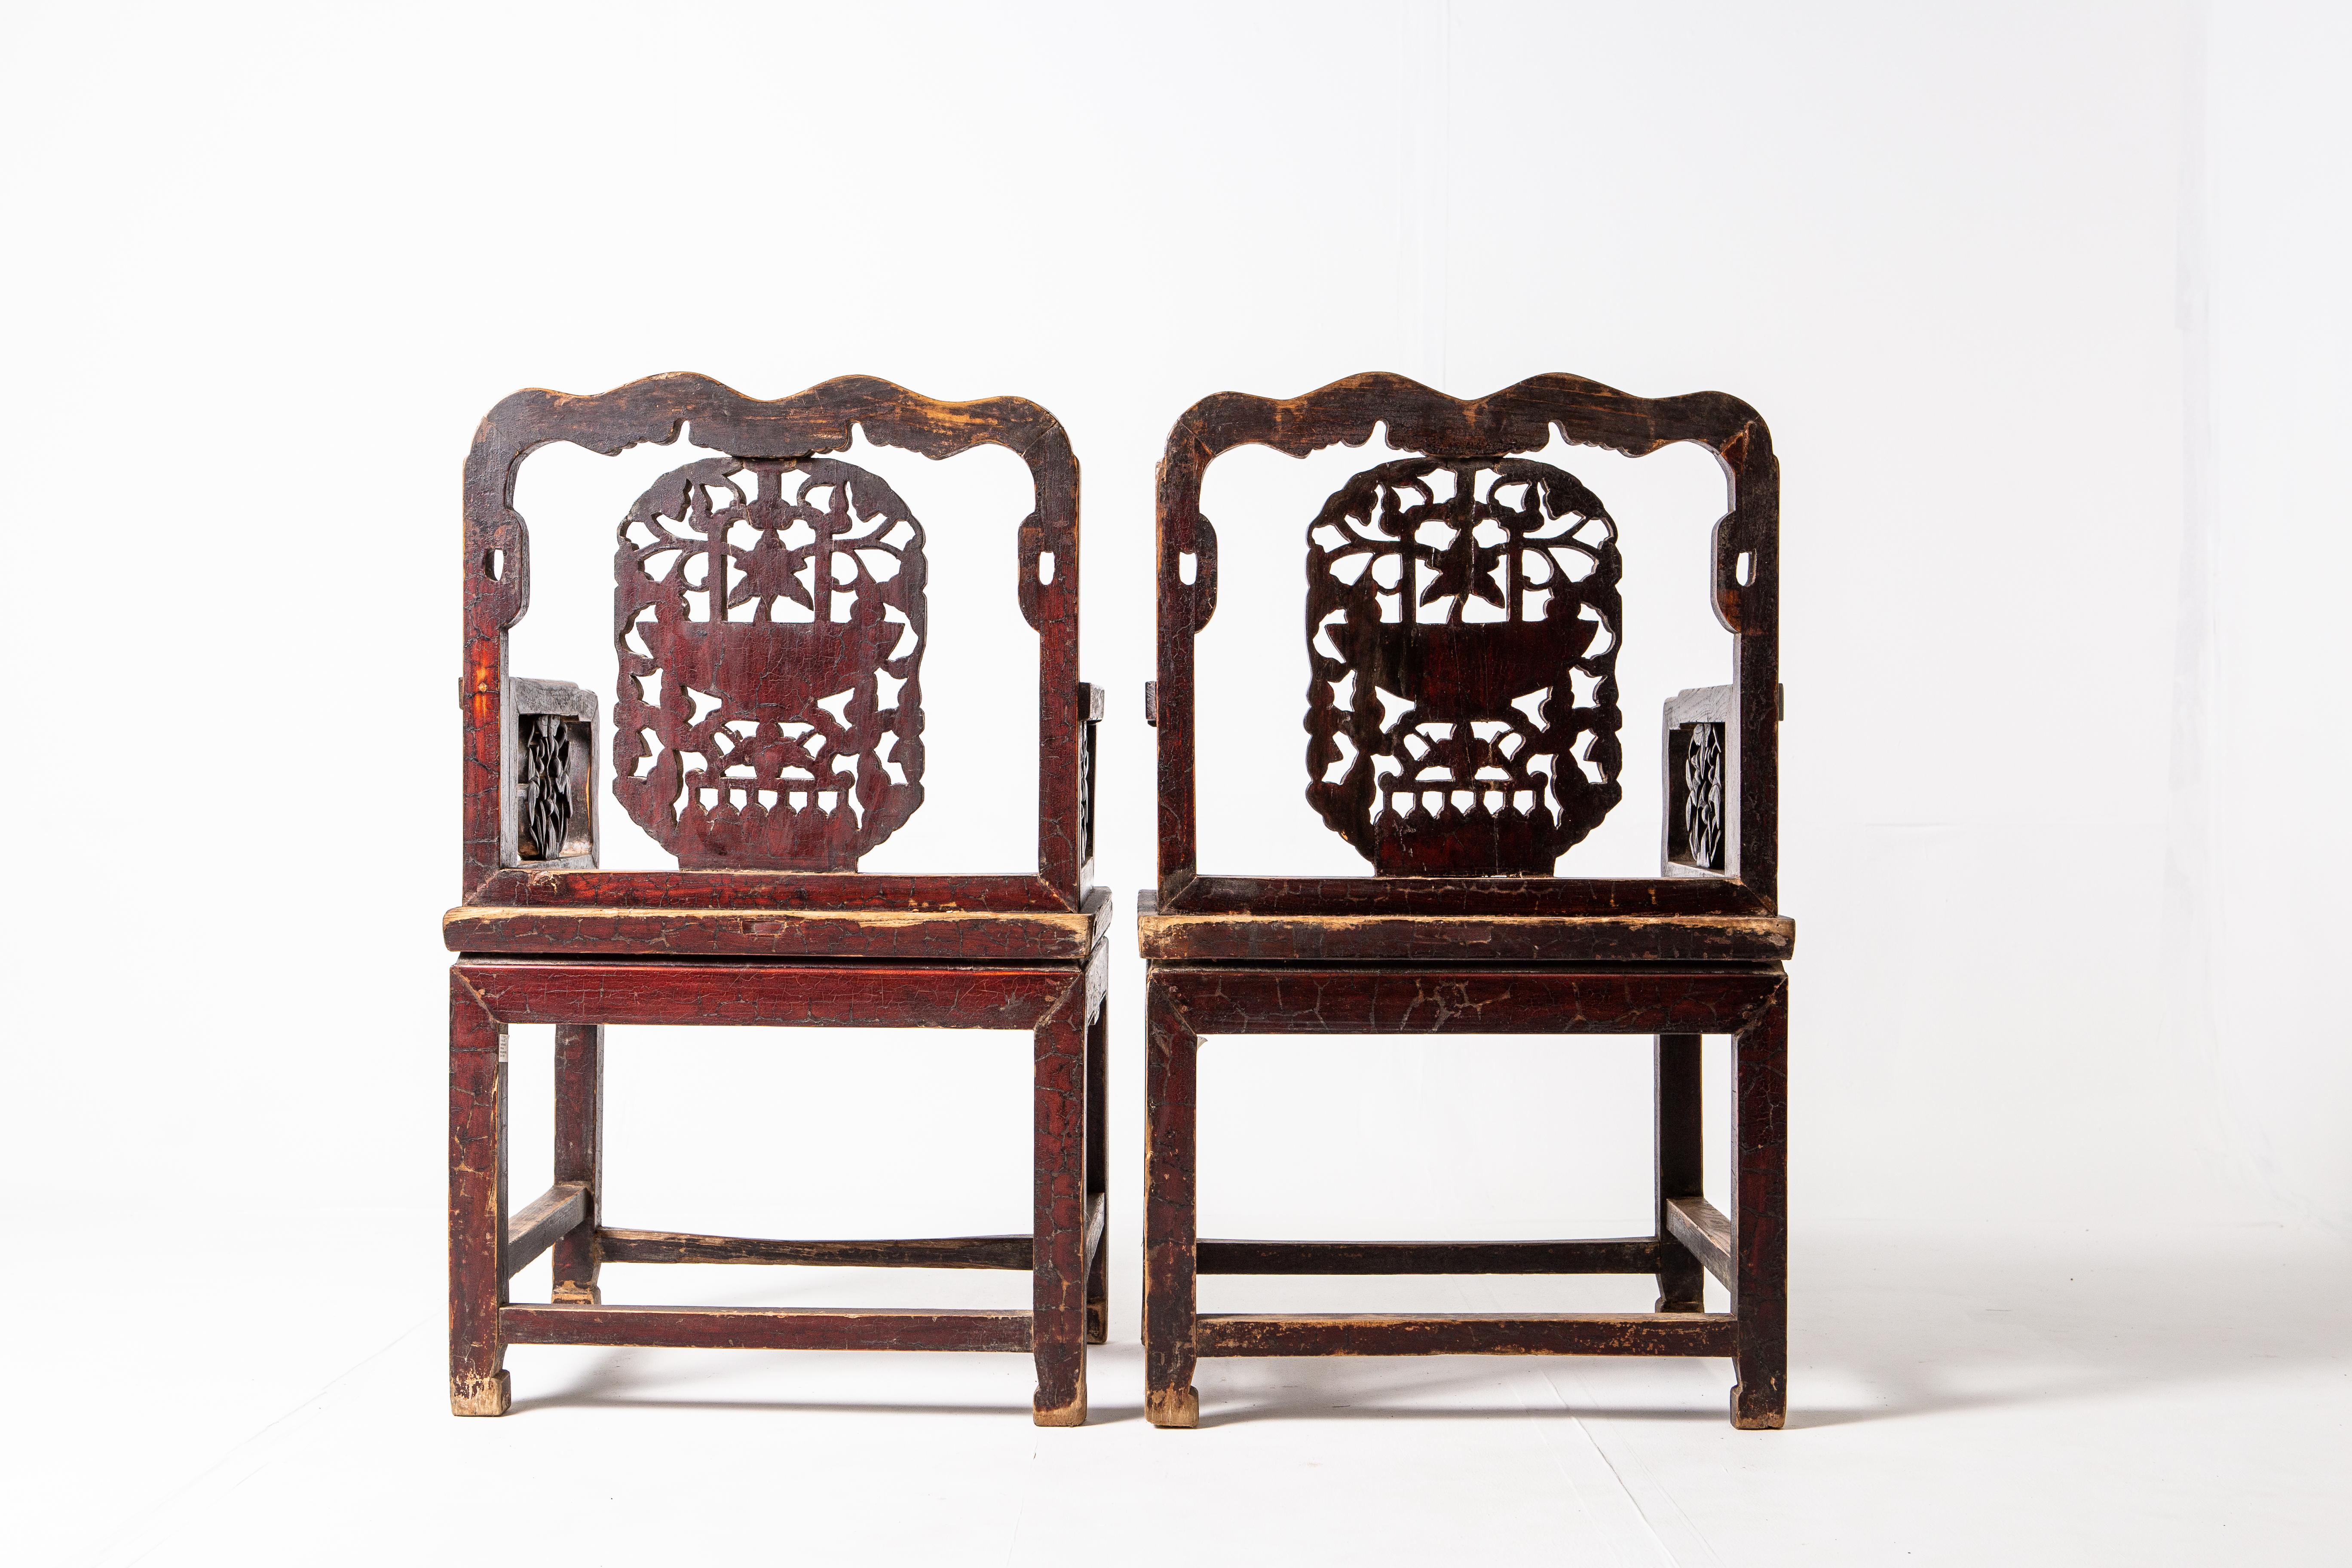 These handsome elm chairs feature botanic carvings and scrollwork on their apron. Dating to the late-Qing Dynasty, the chairs are made up of two parts: a waisted stool and an upper back-rest that resembles a screen panel. Stout and with a generous